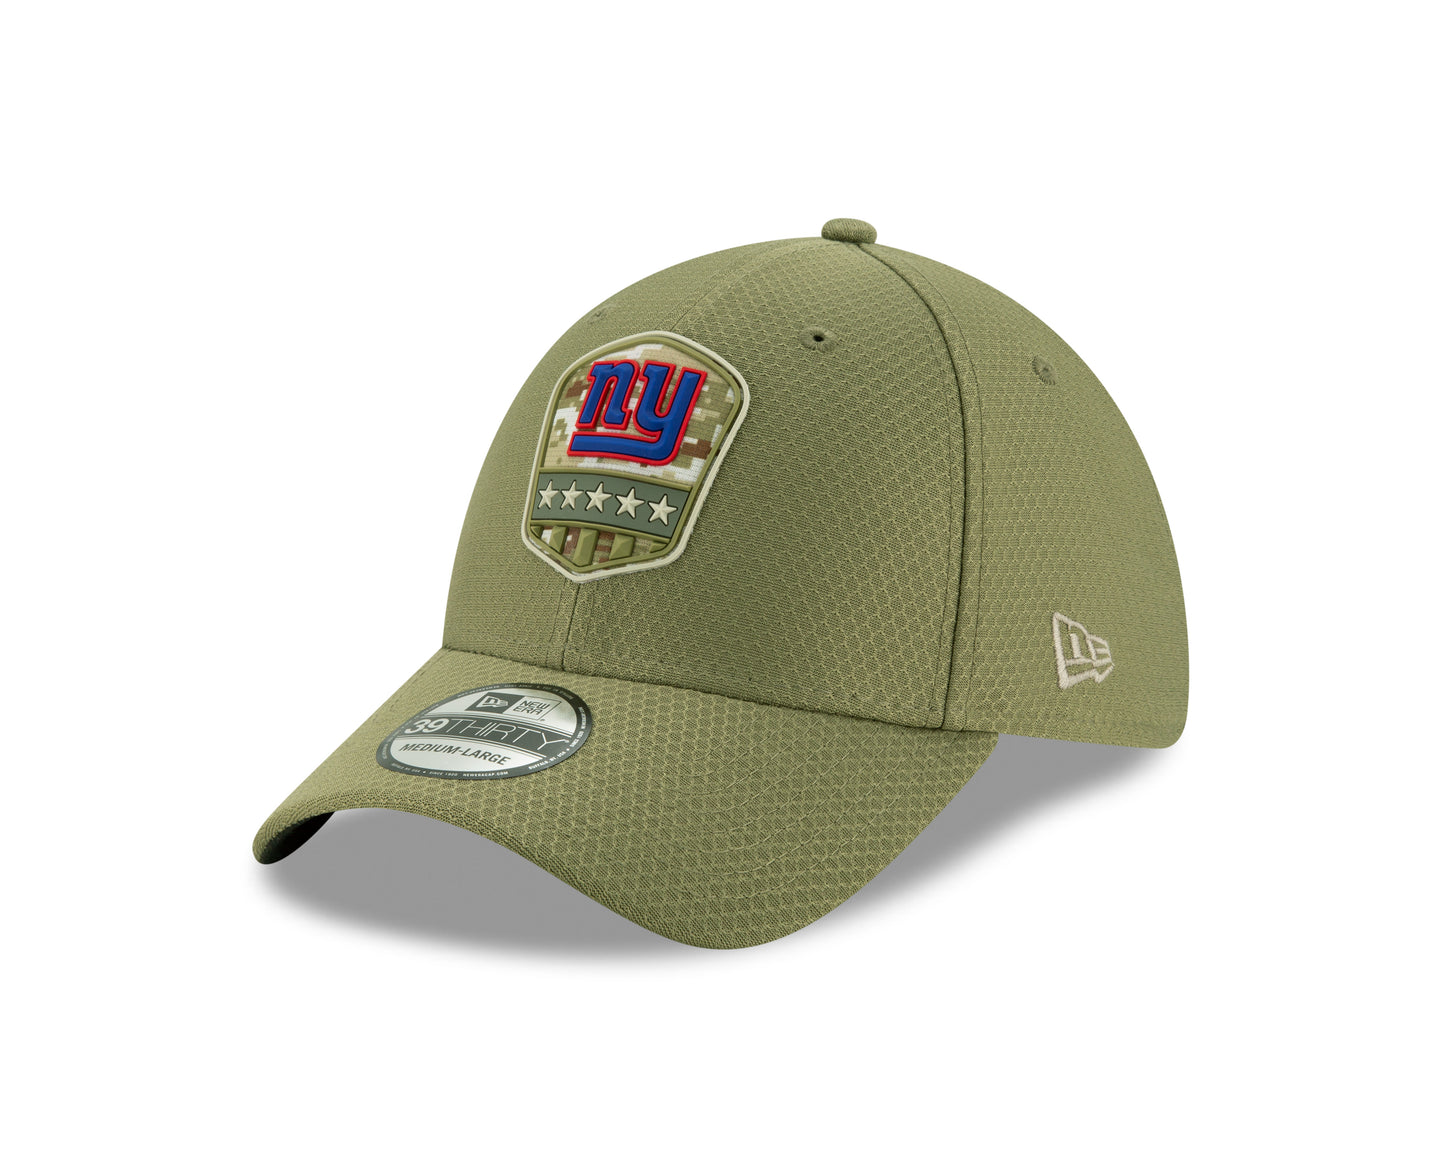 New York Giants New Era 2019 Salute to Service Sideline 39THIRTY Hat Olive